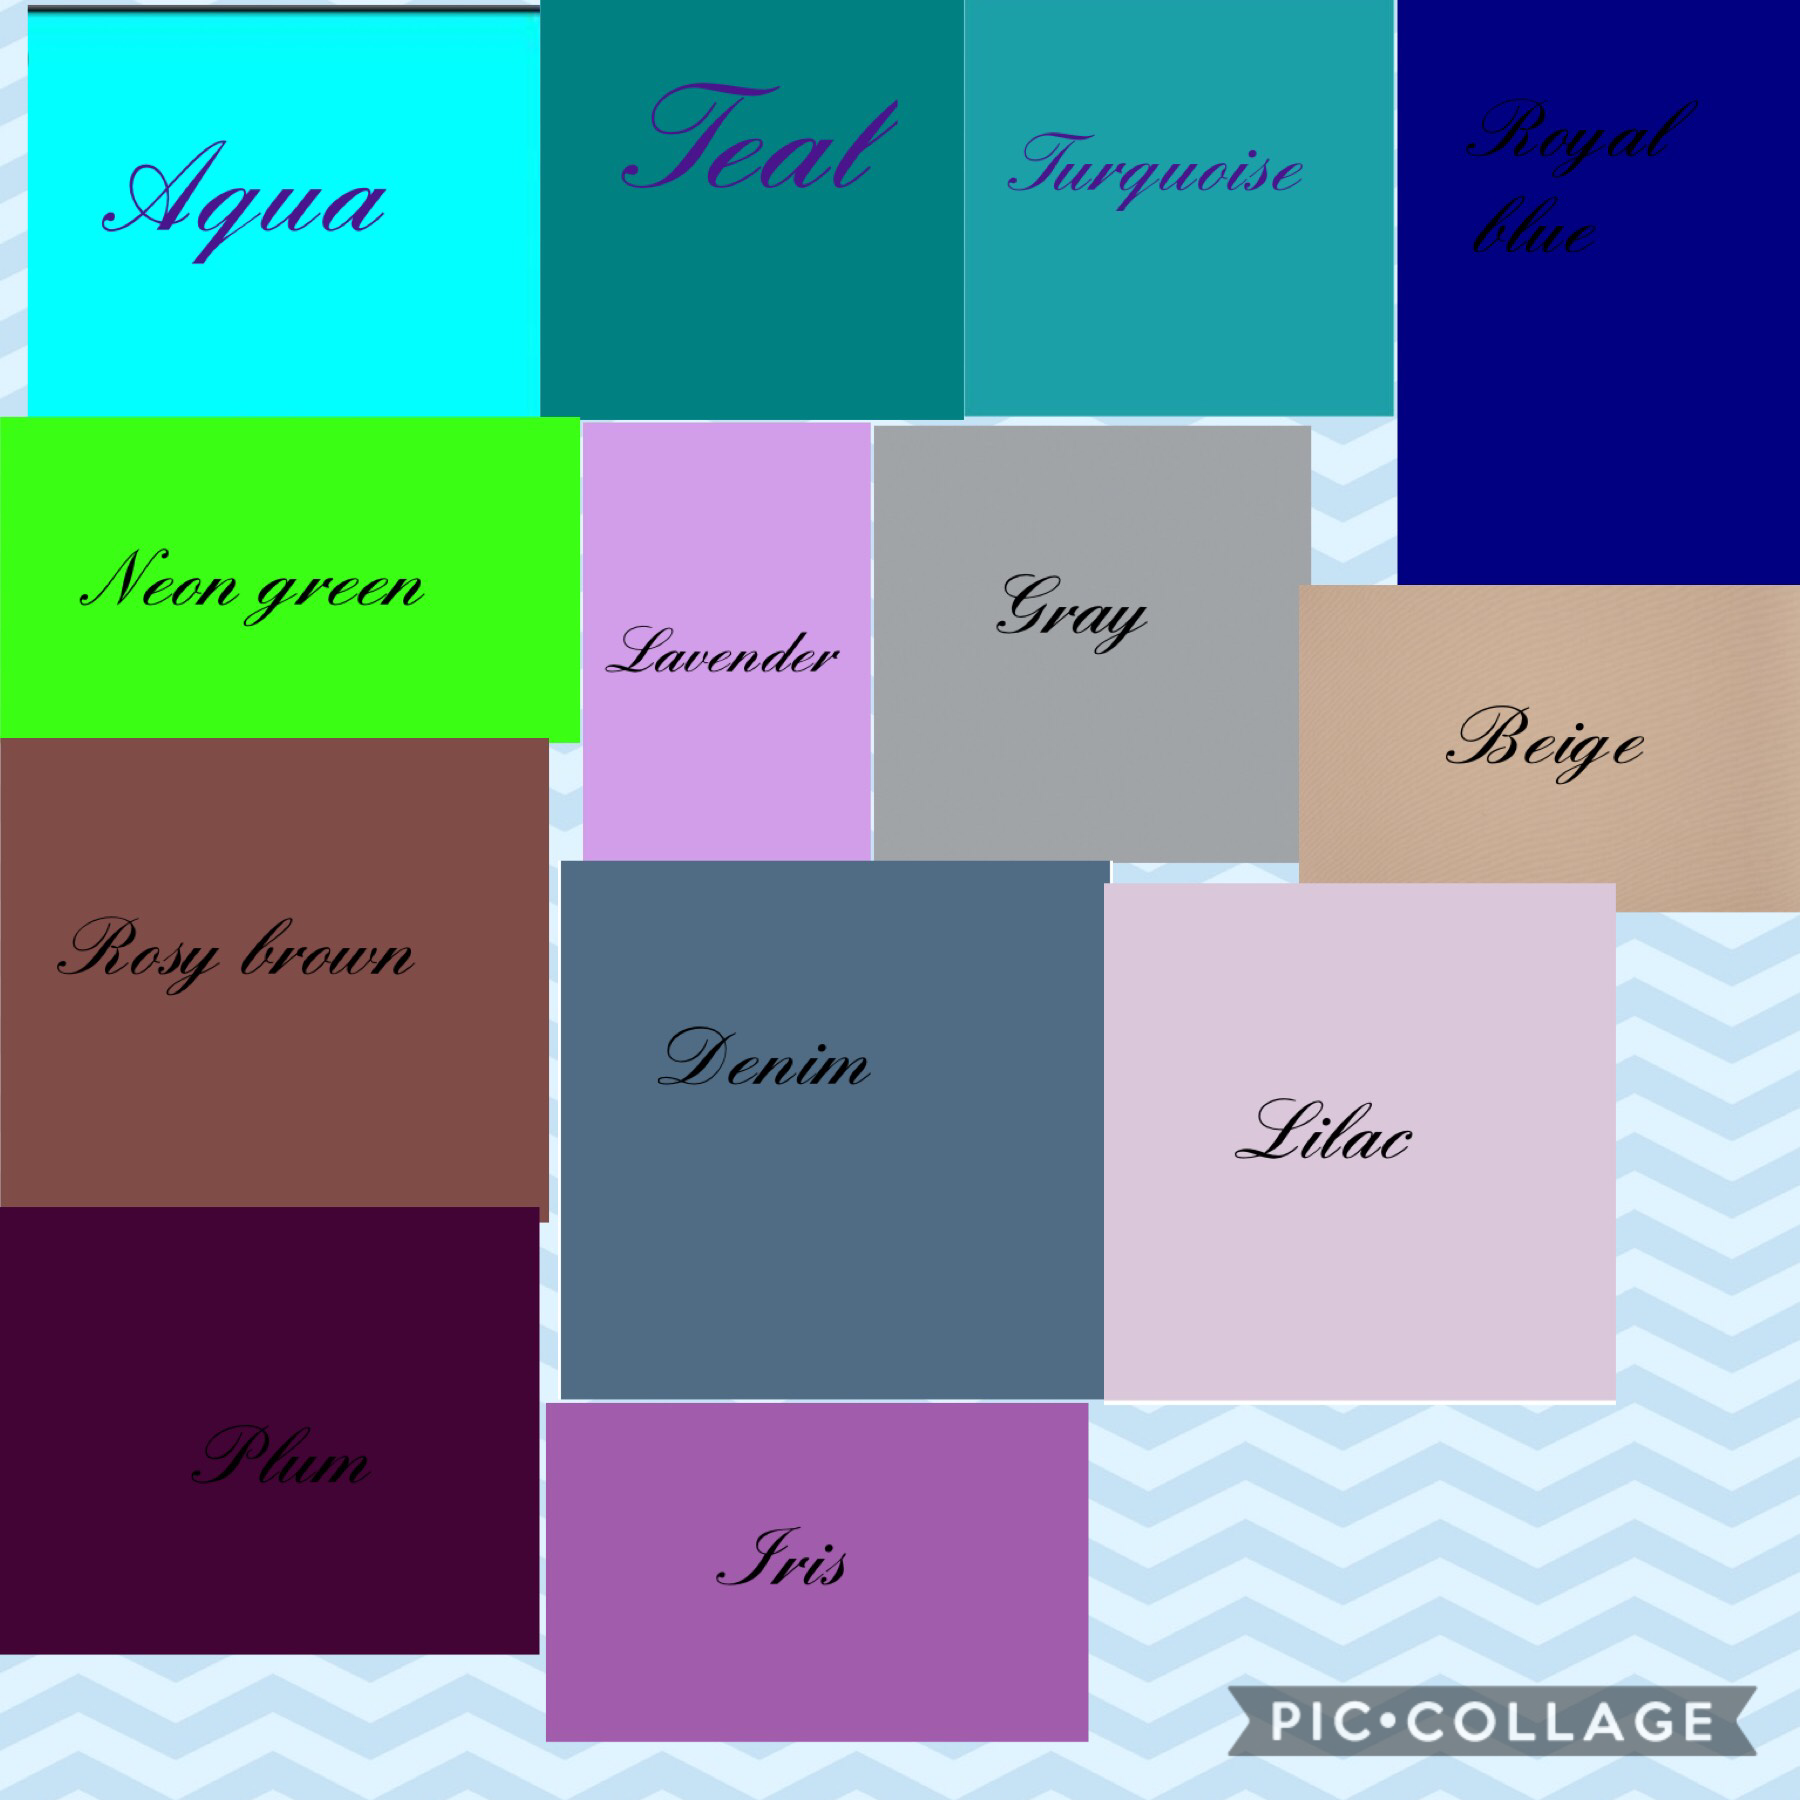 Some of my fav colors